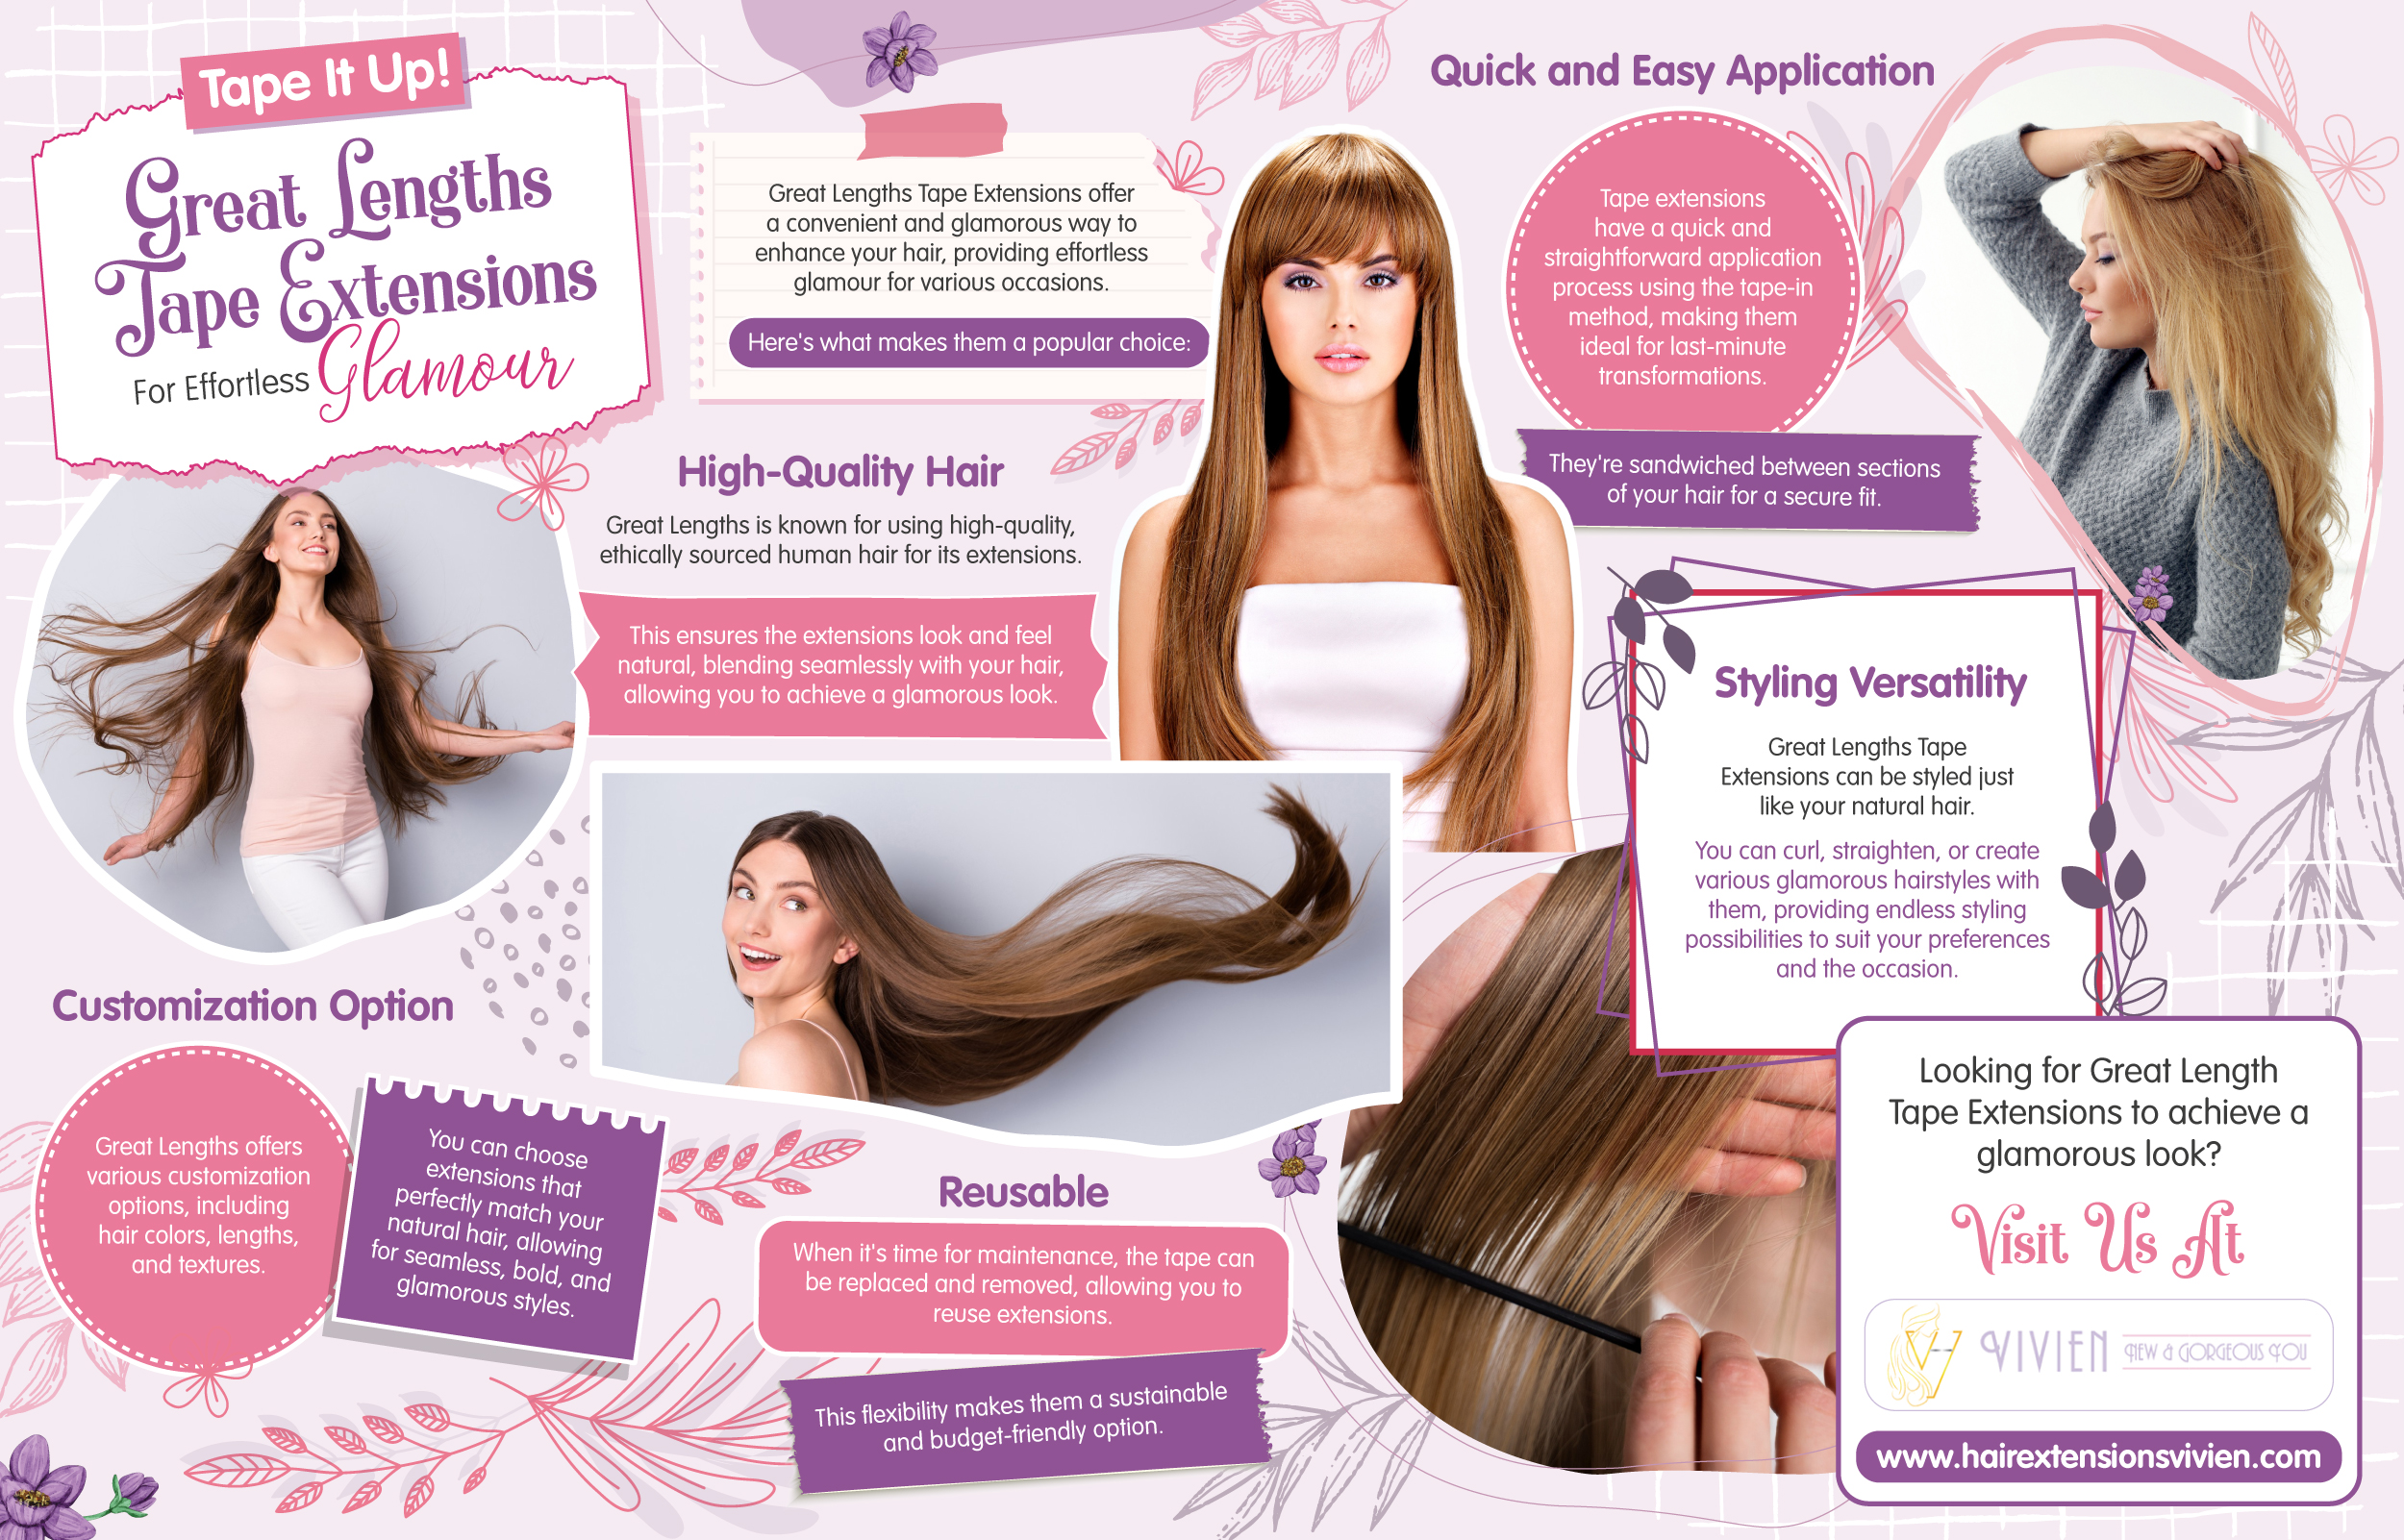 Great Lengths Tape Extensions